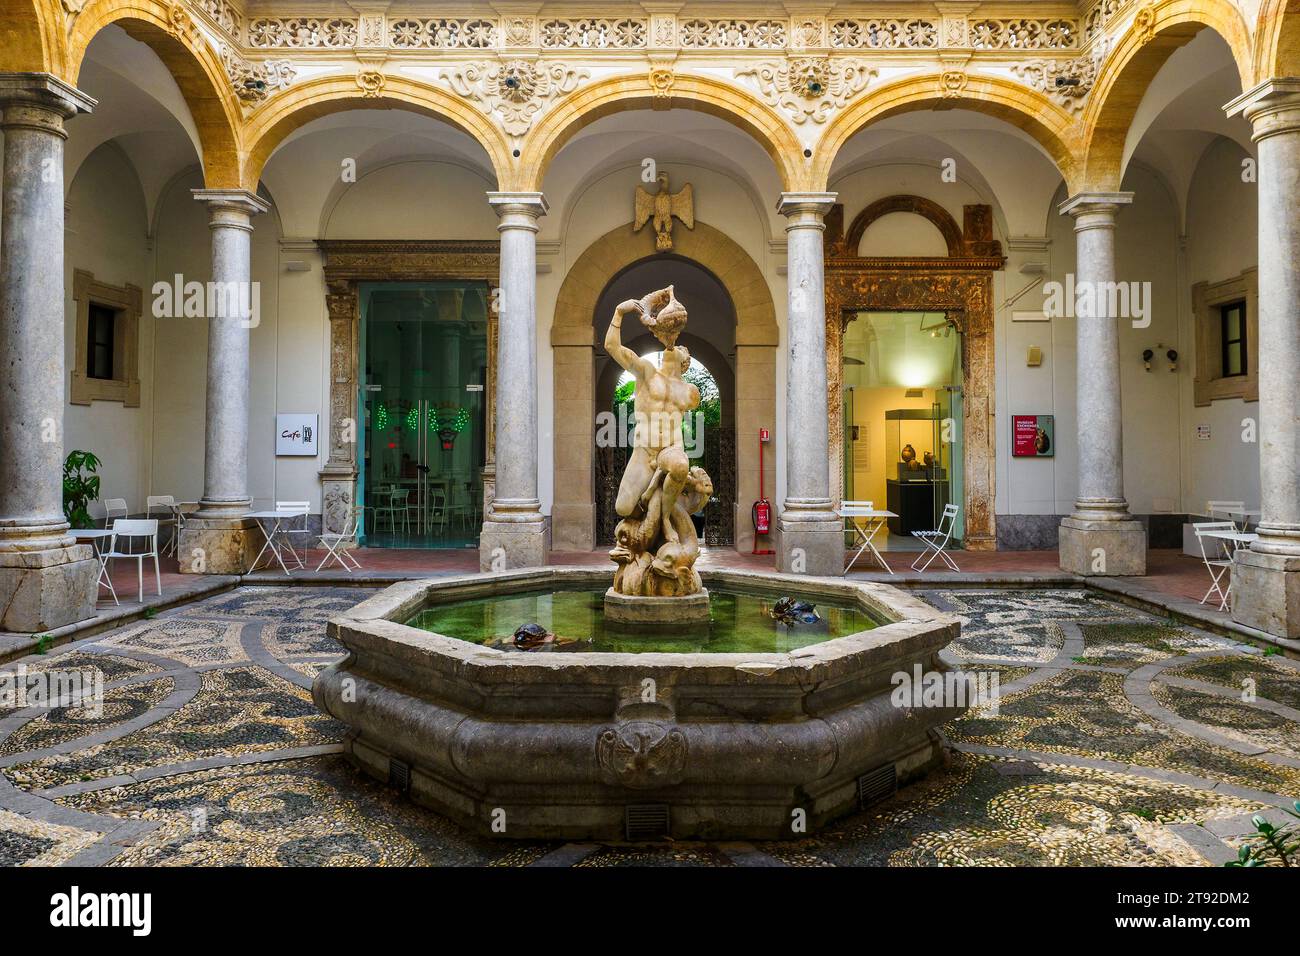 Fountain in the courtyard in the Antonino Salinas Regional Archaeological Museum - Palermo, Sicily Stock Photo